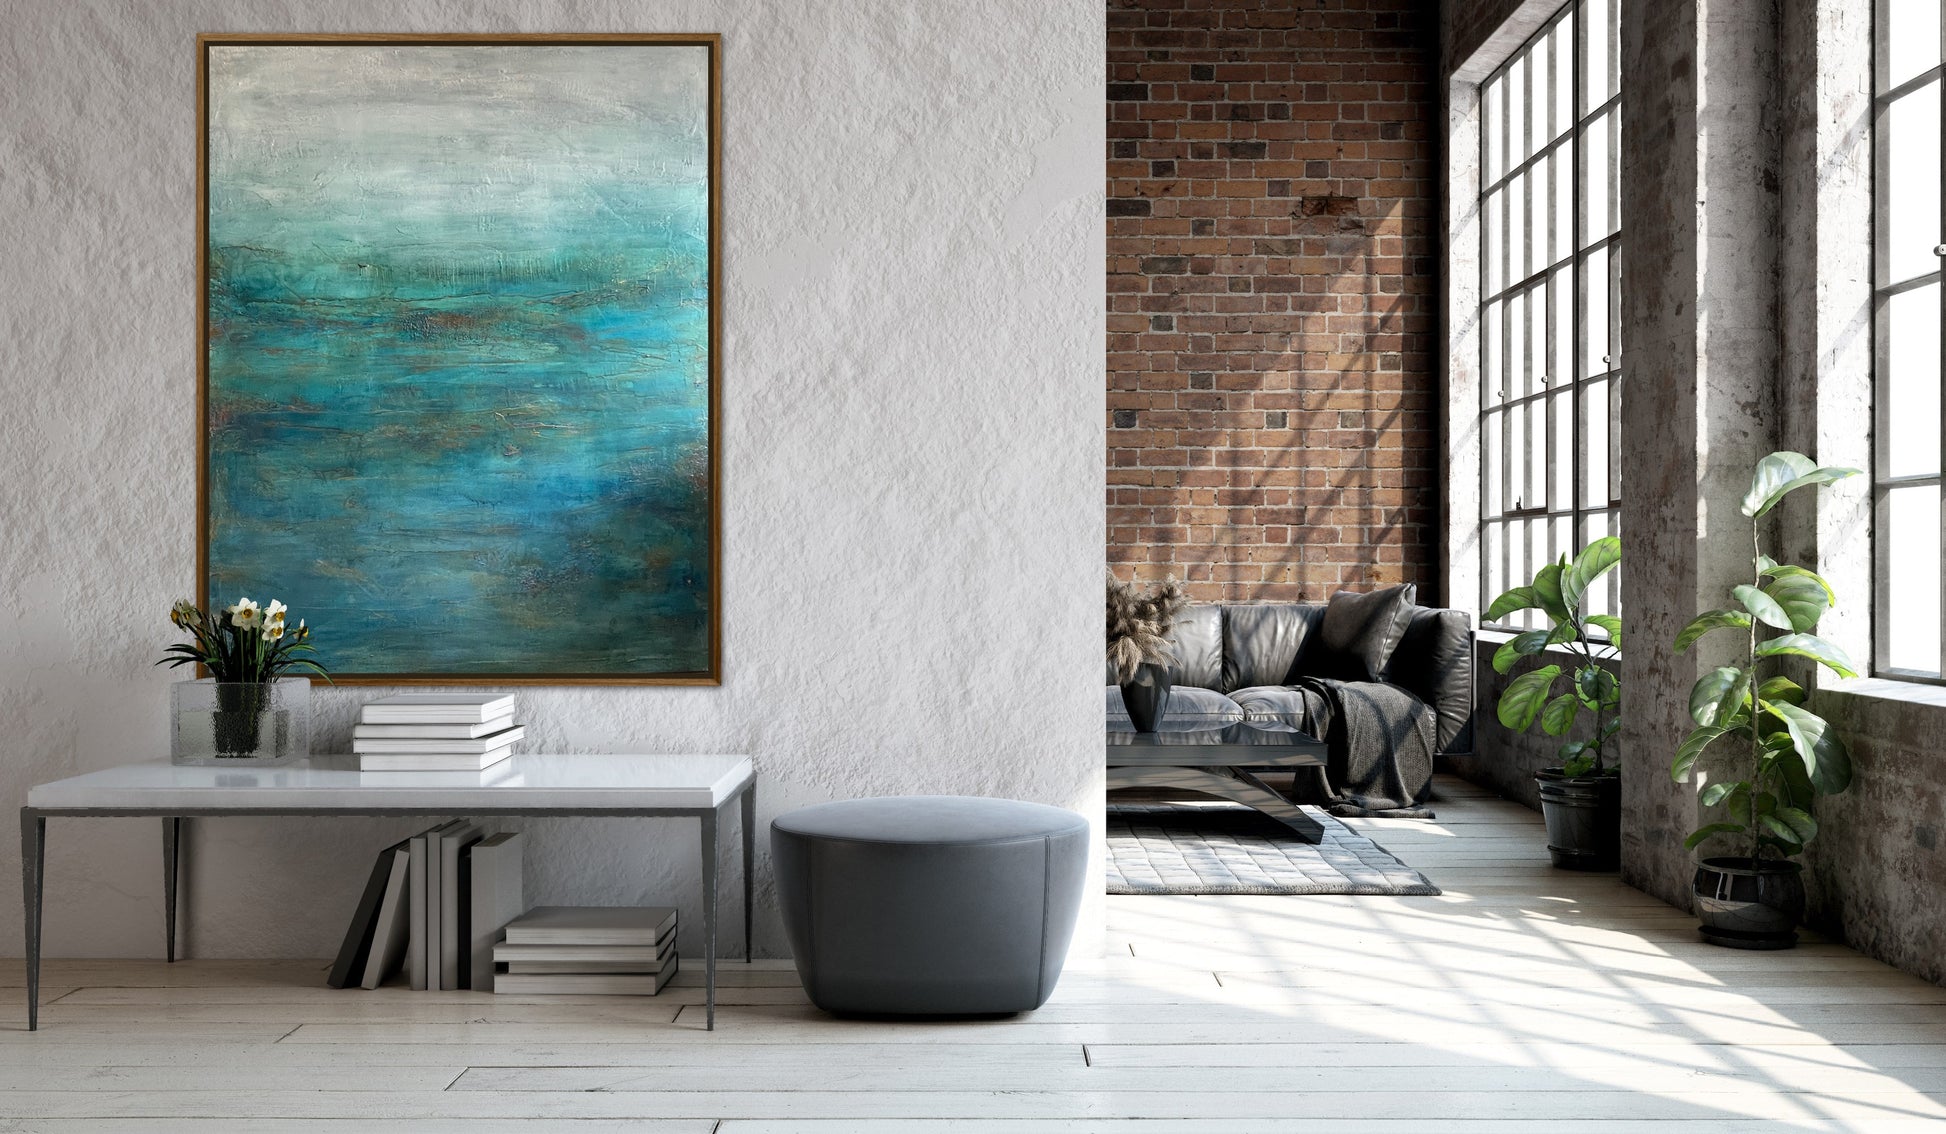 Large teal and blue abstract painting